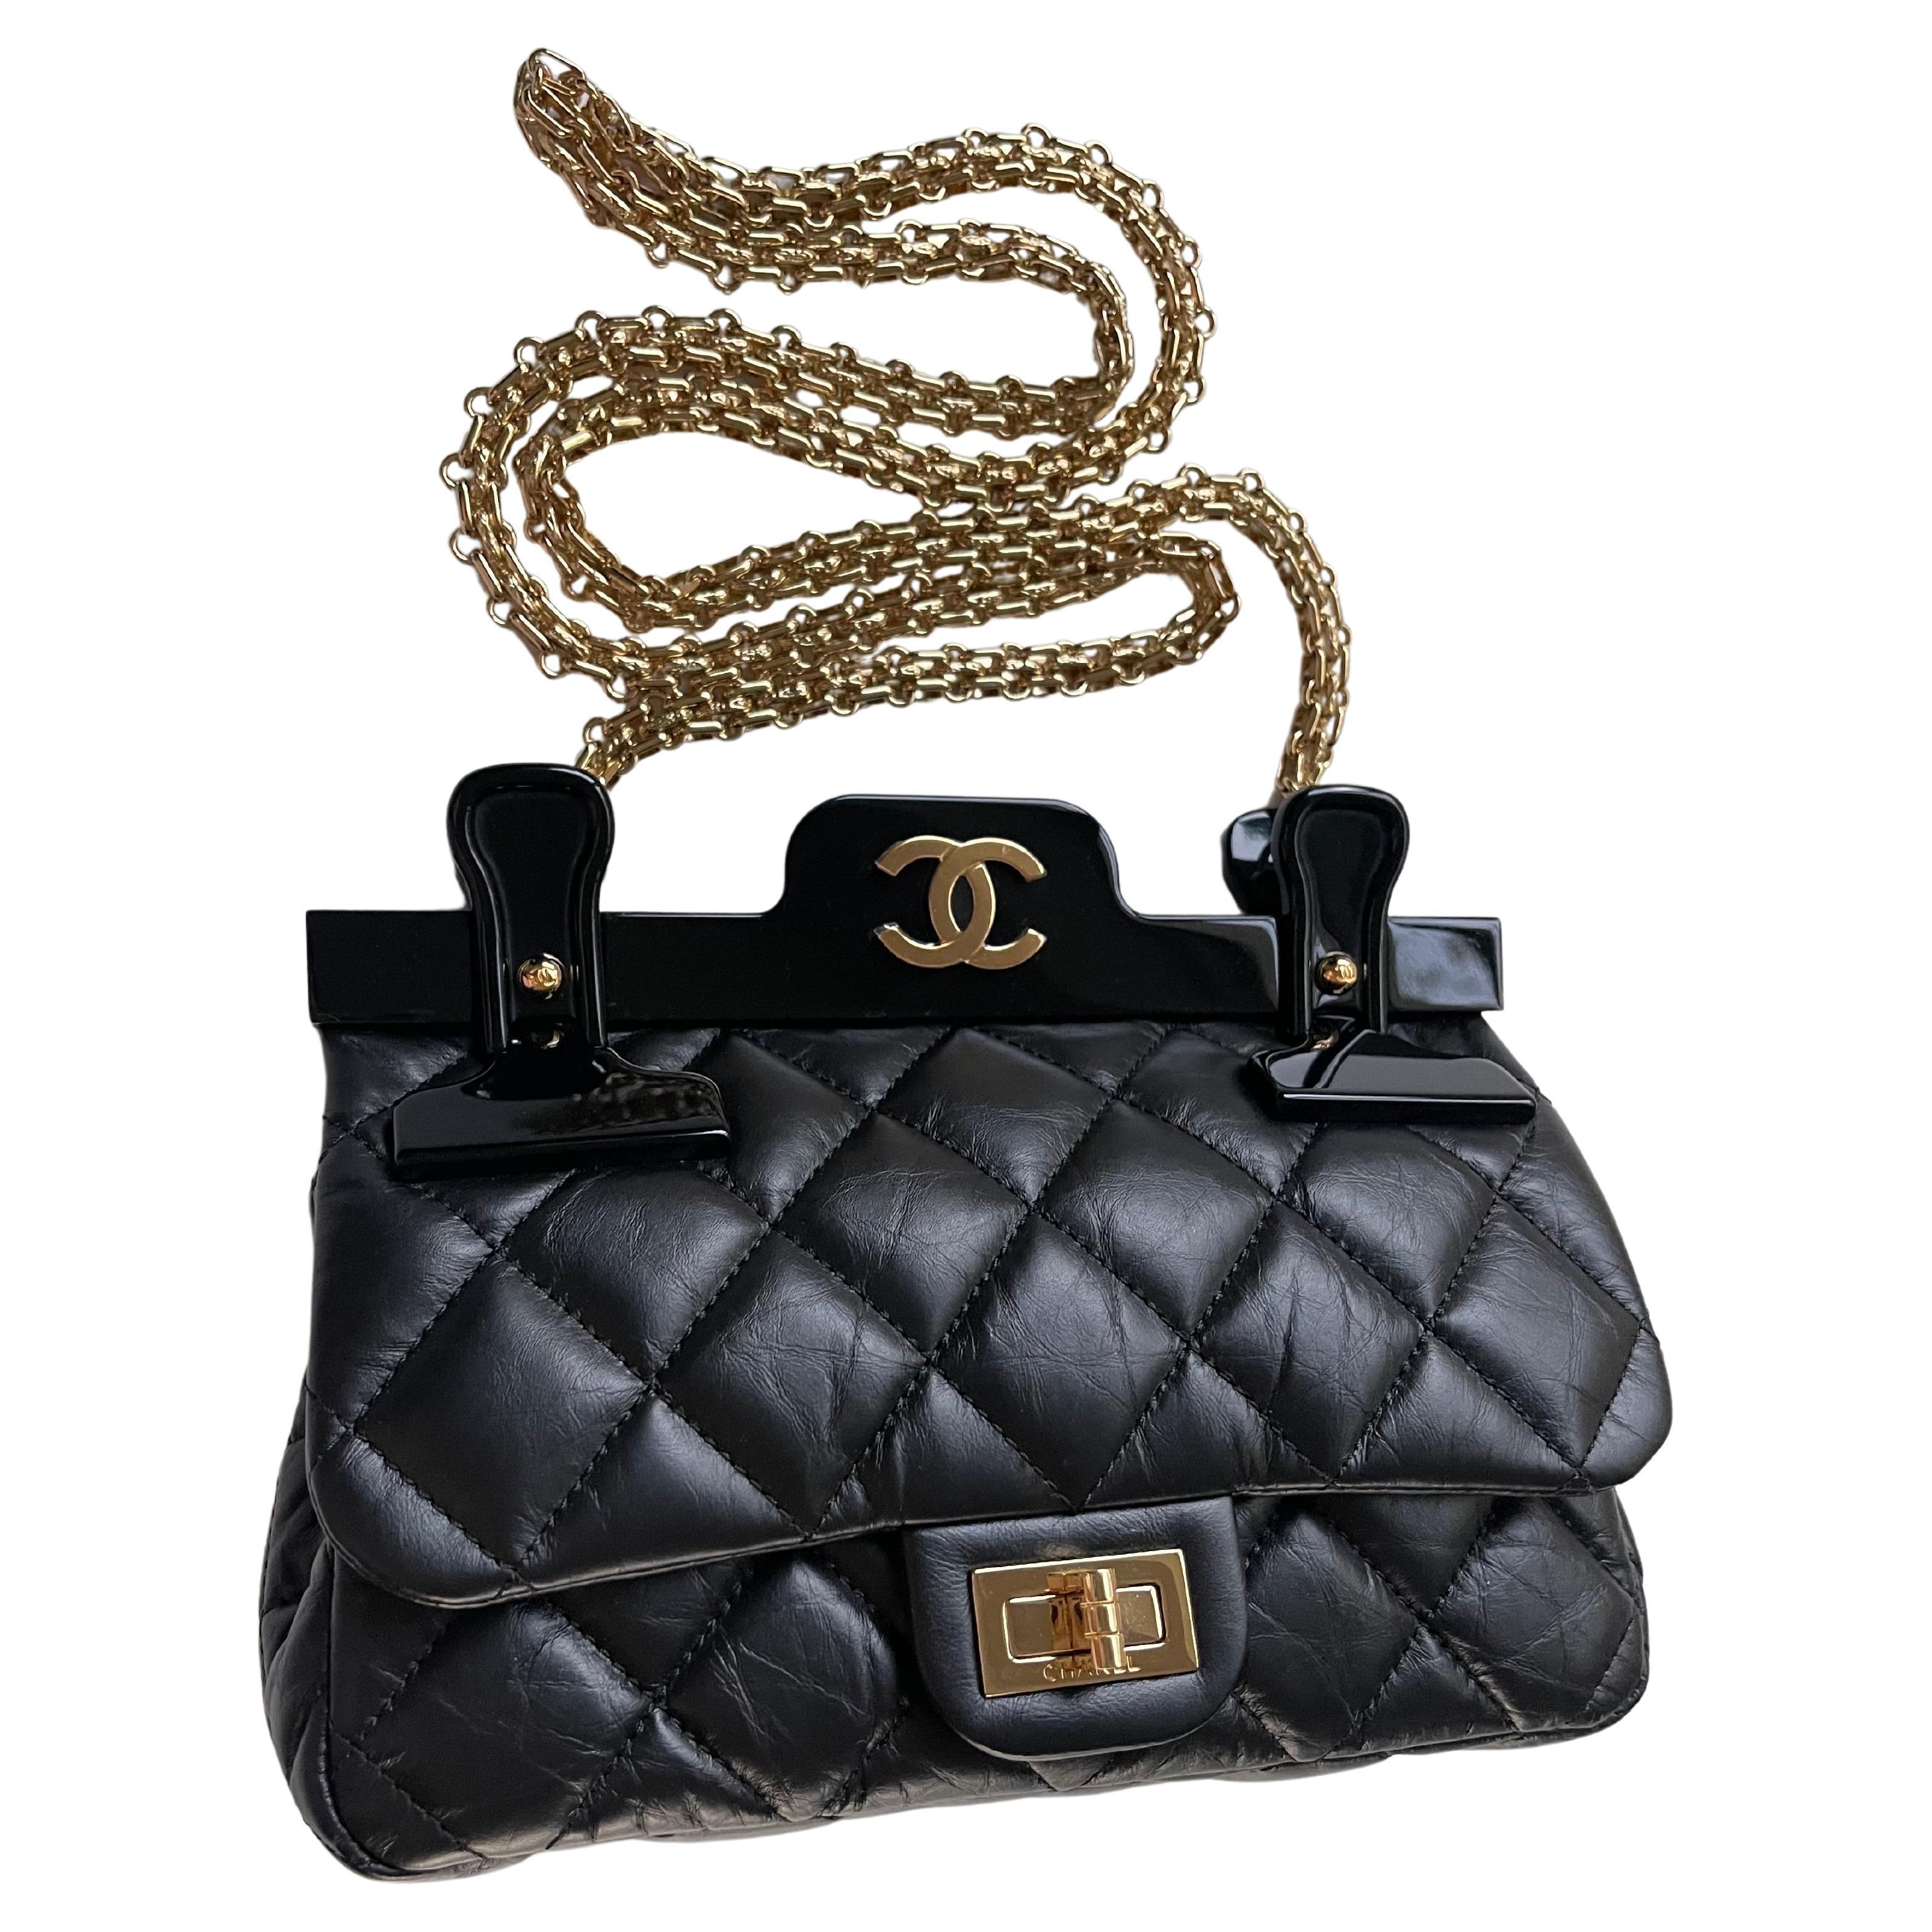 Chanel 2016 Runway Rare Small Hanger Limited Edition Reissue Classic Flap Bag For Sale 10